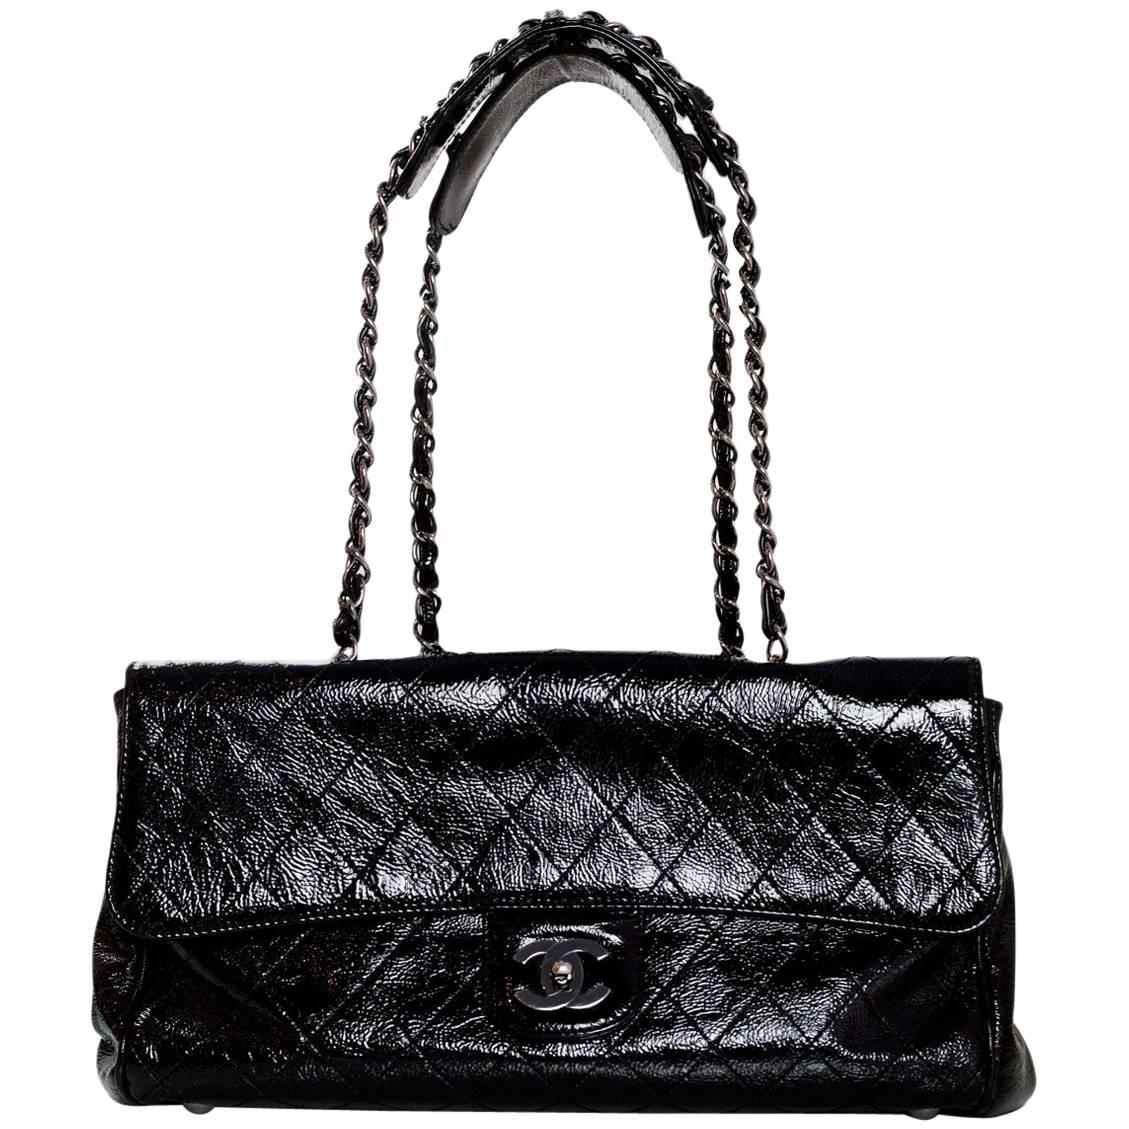 Chanel Black Crackled Patent Leather Ritz Quilted Flap Bag 